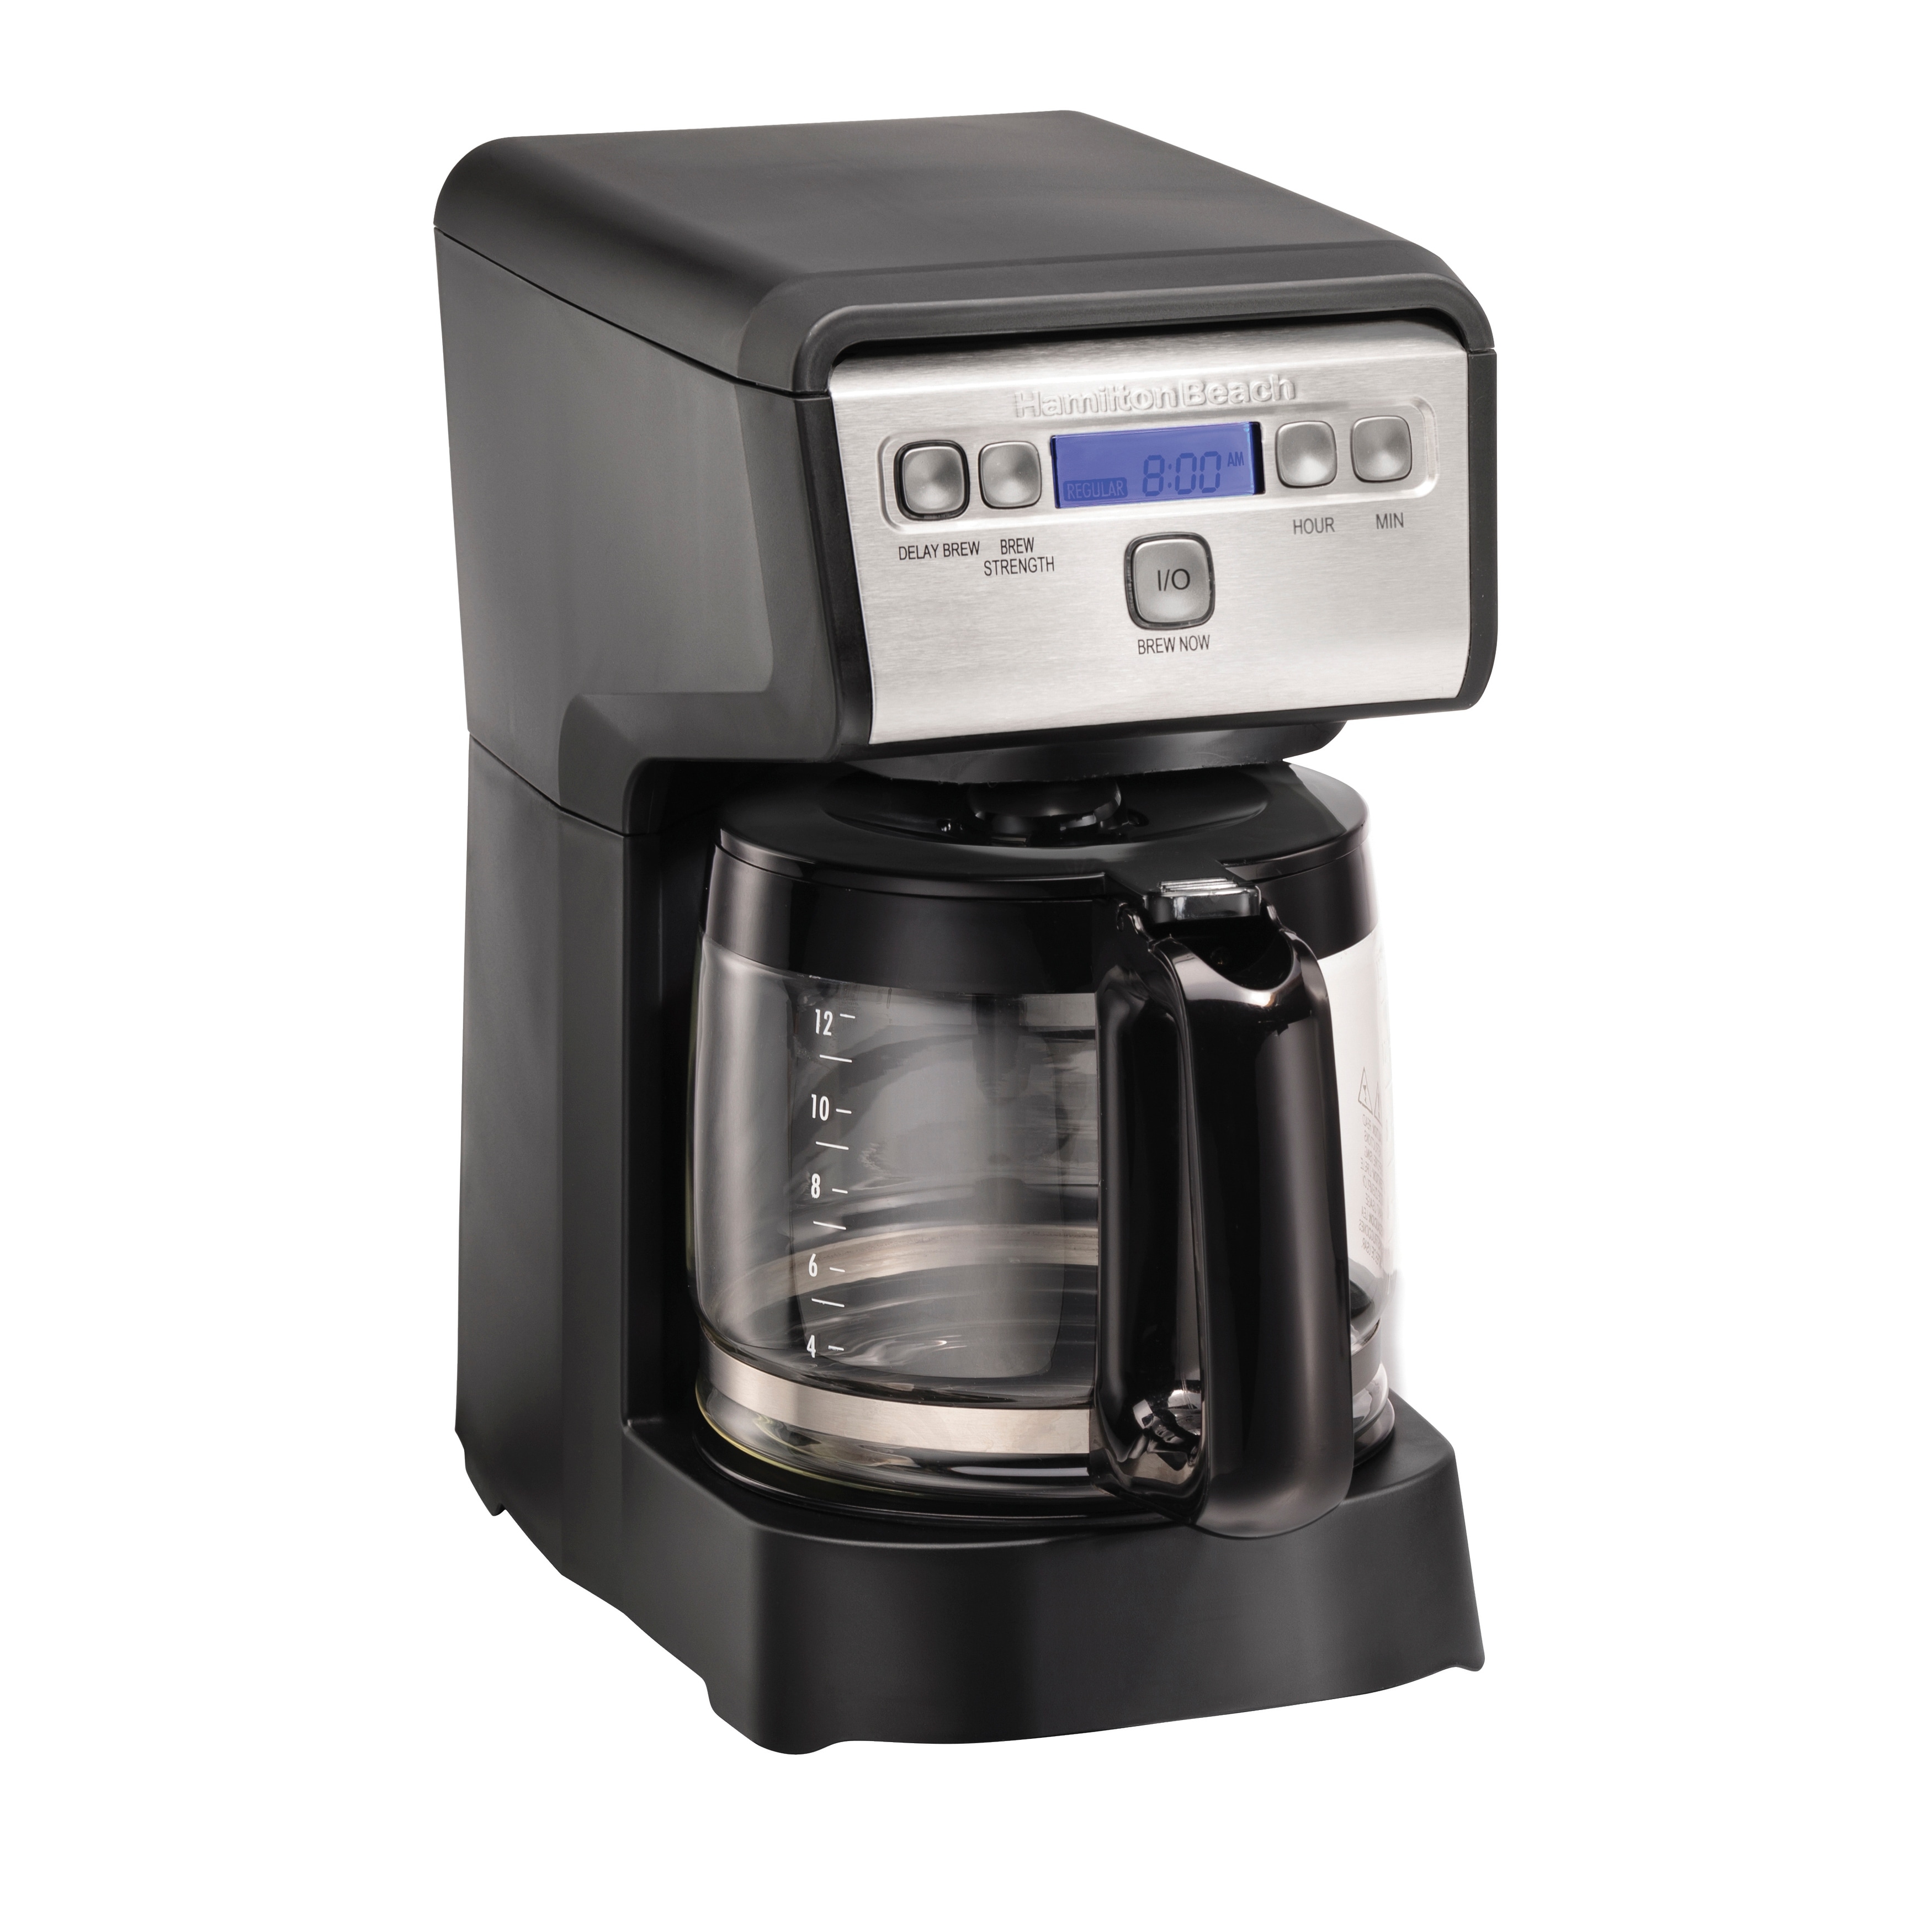 https://ak1.ostkcdn.com/images/products/is/images/direct/a1b5ee9b4ab76926899ac57590e2114d28e8b809/Hamilton-Beach-12-Cup-Compact-Programmable-Coffee-Maker.jpg